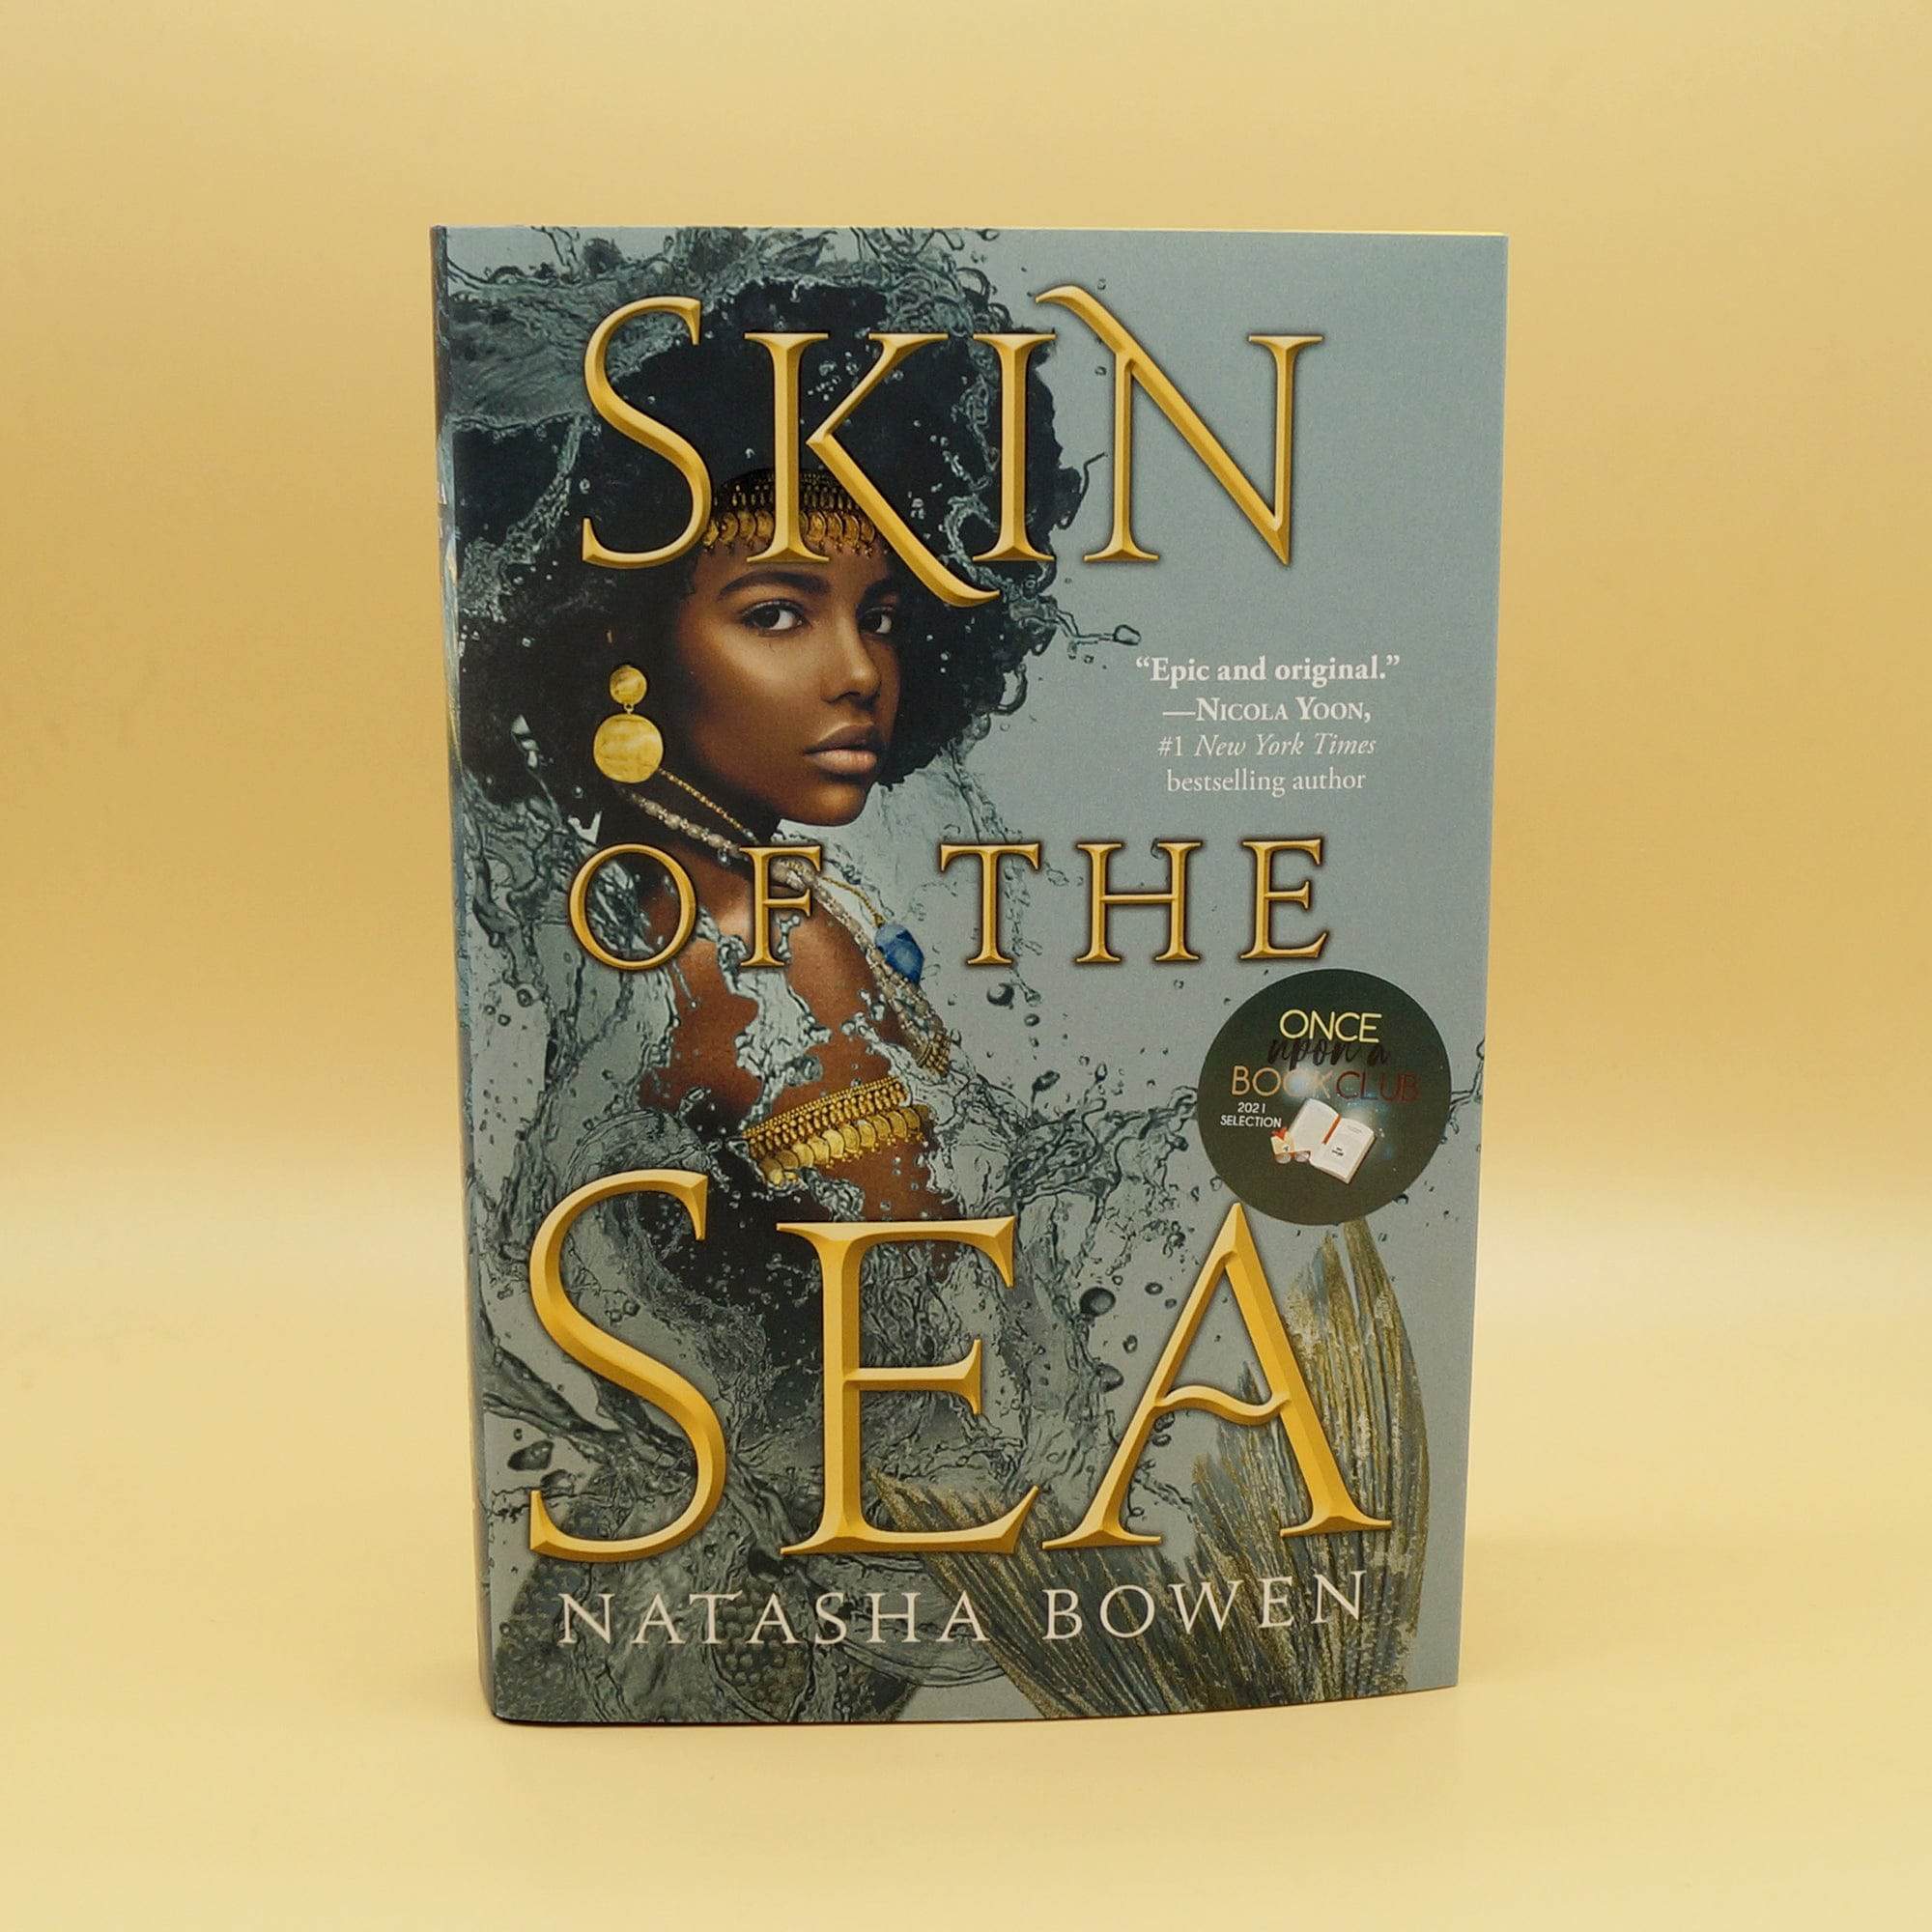 the　ONLY　Sea　of　Skin　Club　a　Out)　–　BOOK　Upon　Book　(Sold　Once